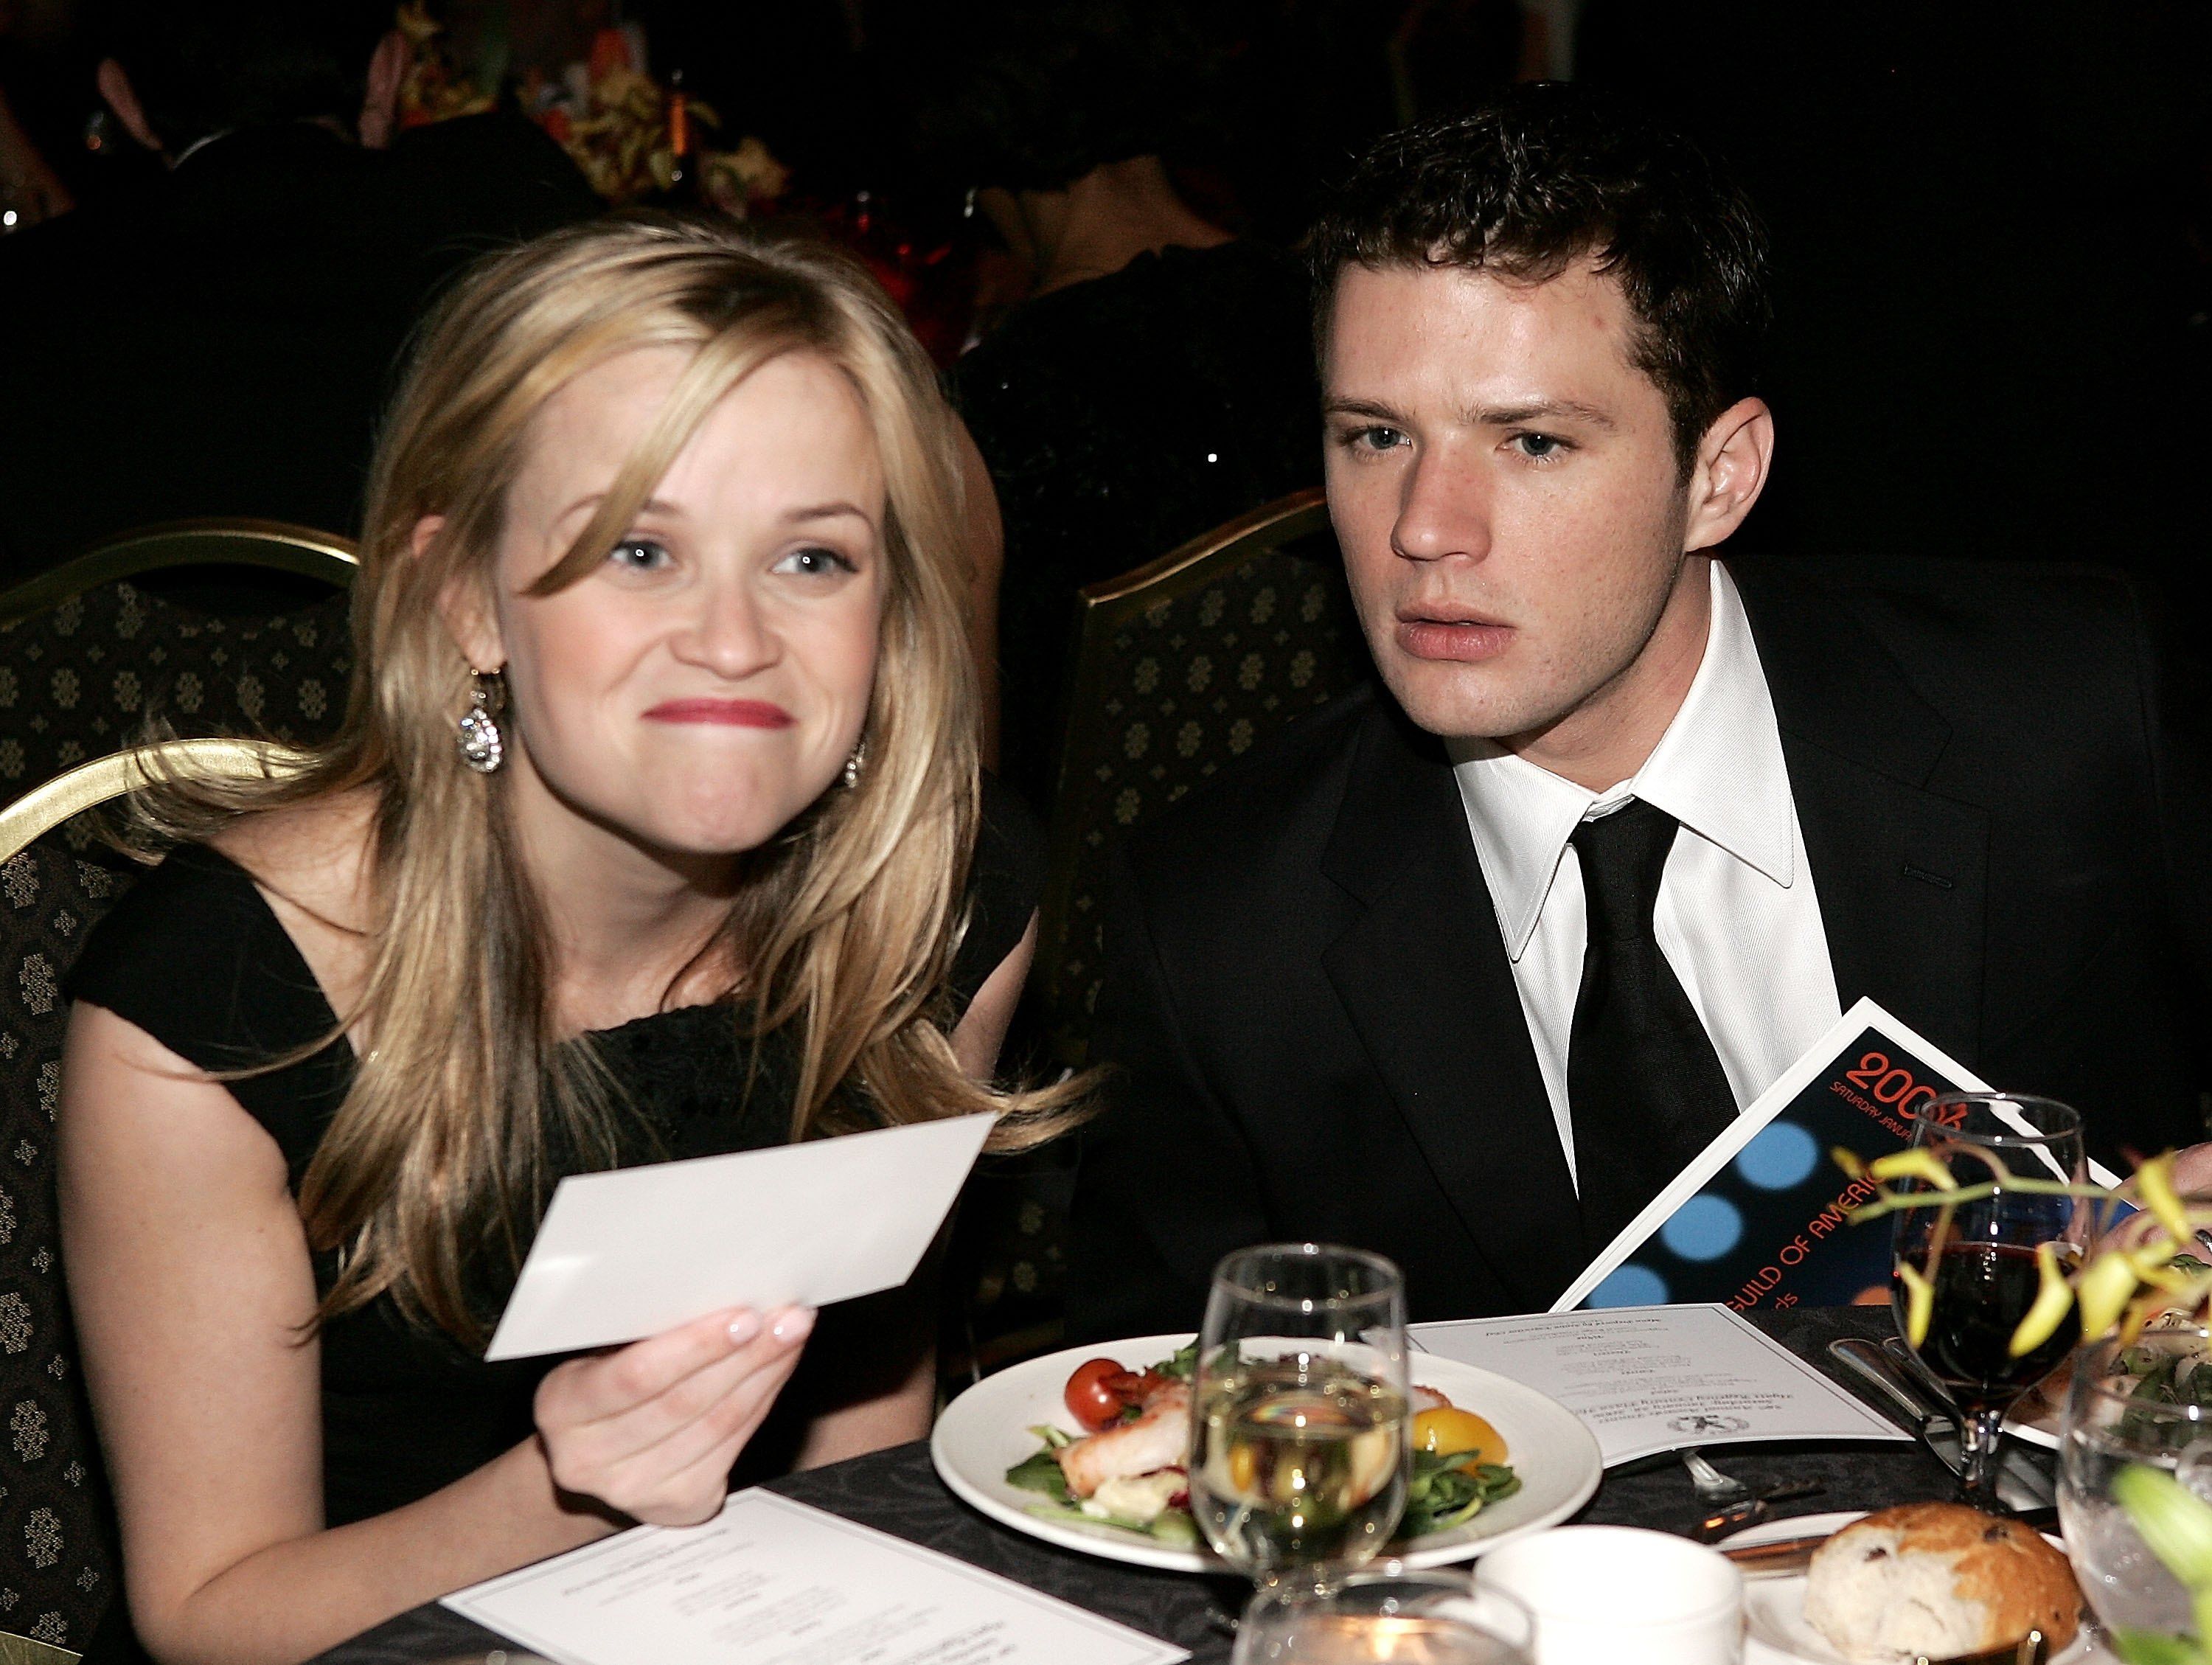 Reese Witherspoon and Ryan Phillippe talk during the 58th Annual Directors Guild Of America Awards. | Source: Getty Images